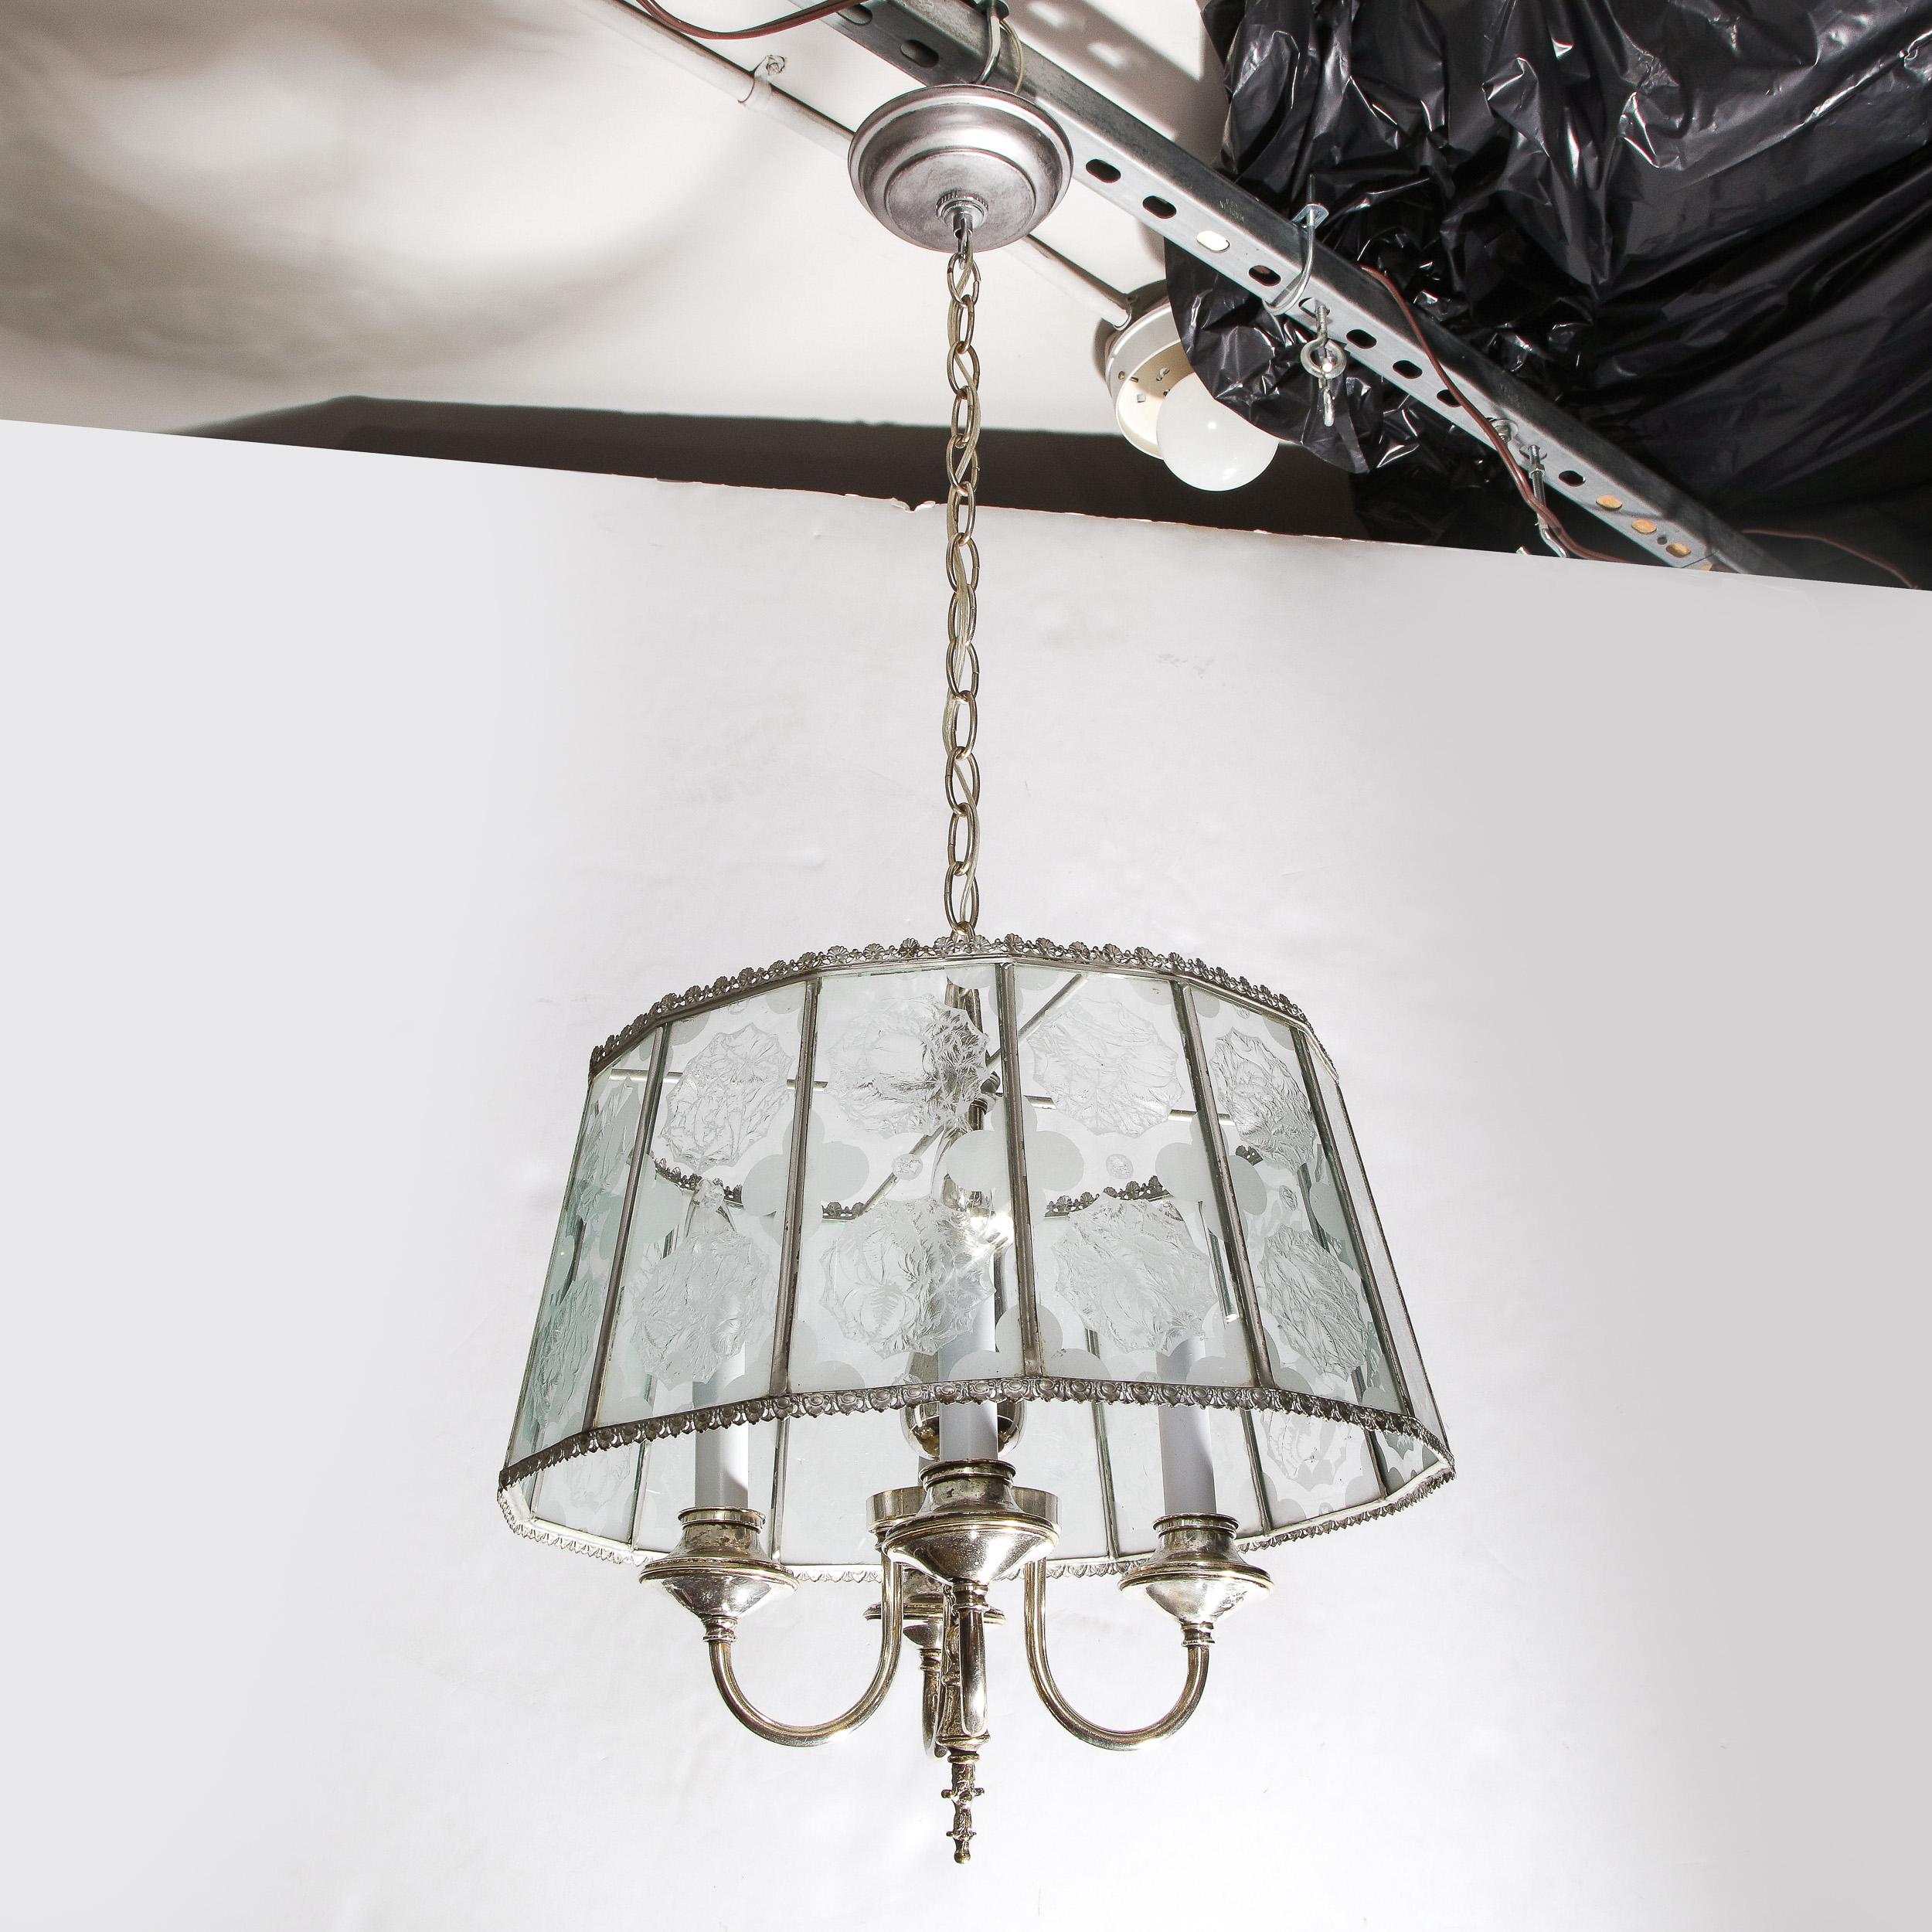 20th Century Art Deco Revival Lantern Translucent Glass Pendant with Silvered Fittings